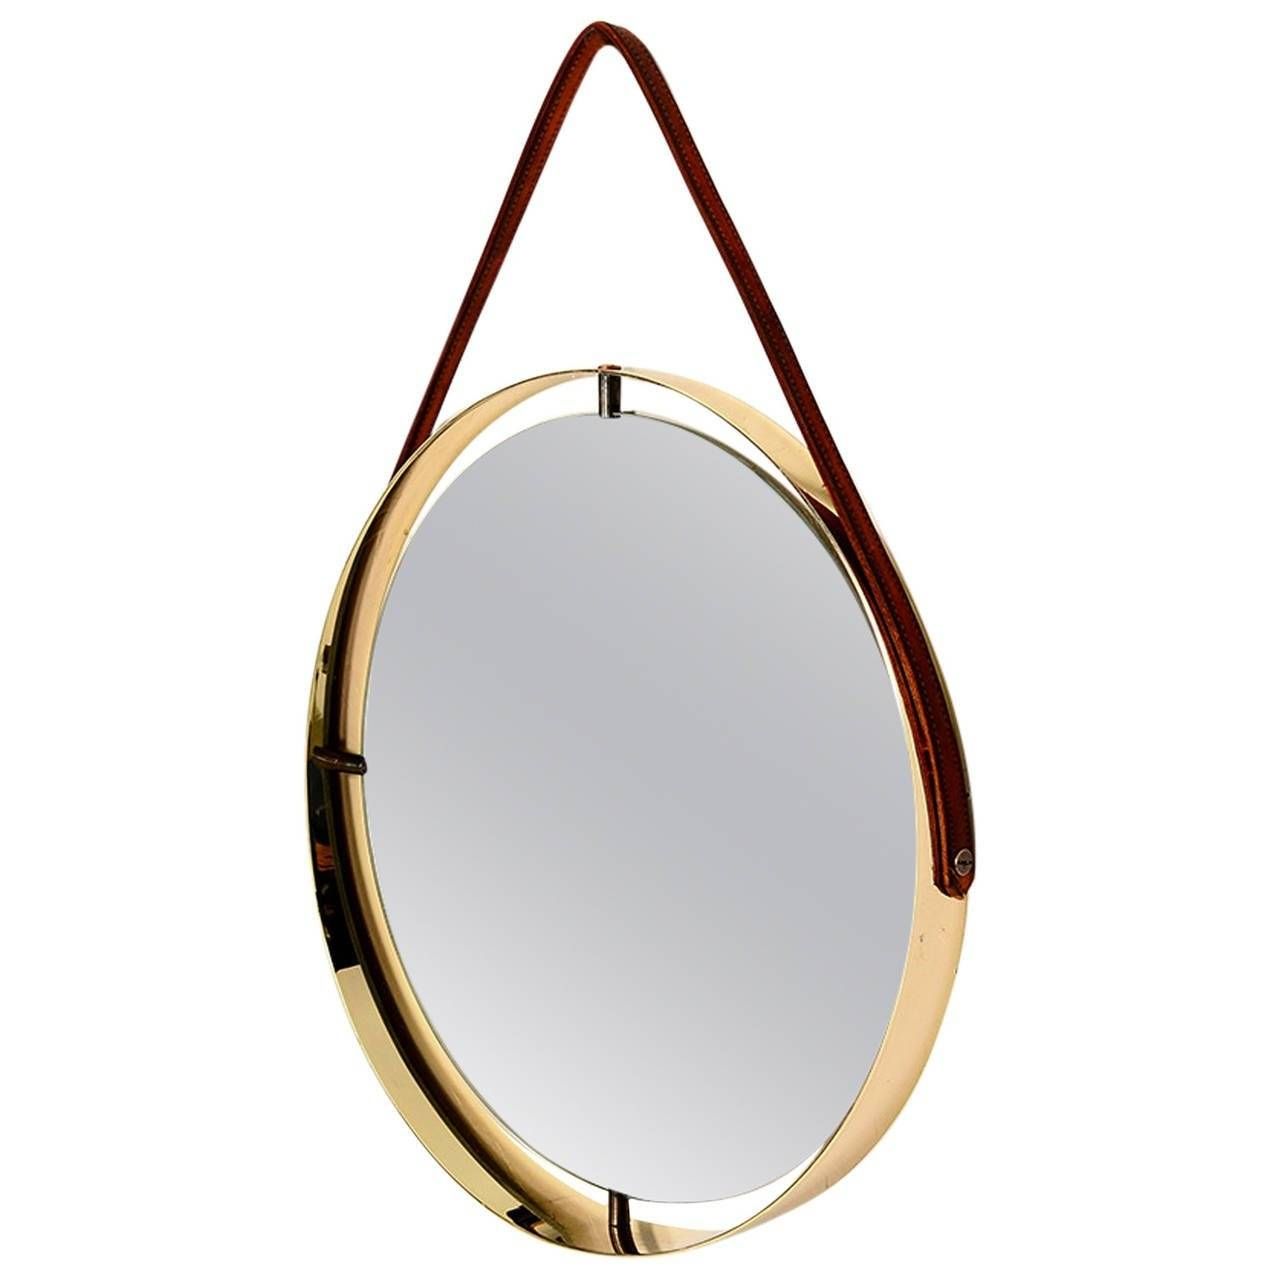 Round Mirror With Leather Strap For Sale At 1stdibs Intended For Leather Round Mirrors (View 7 of 25)